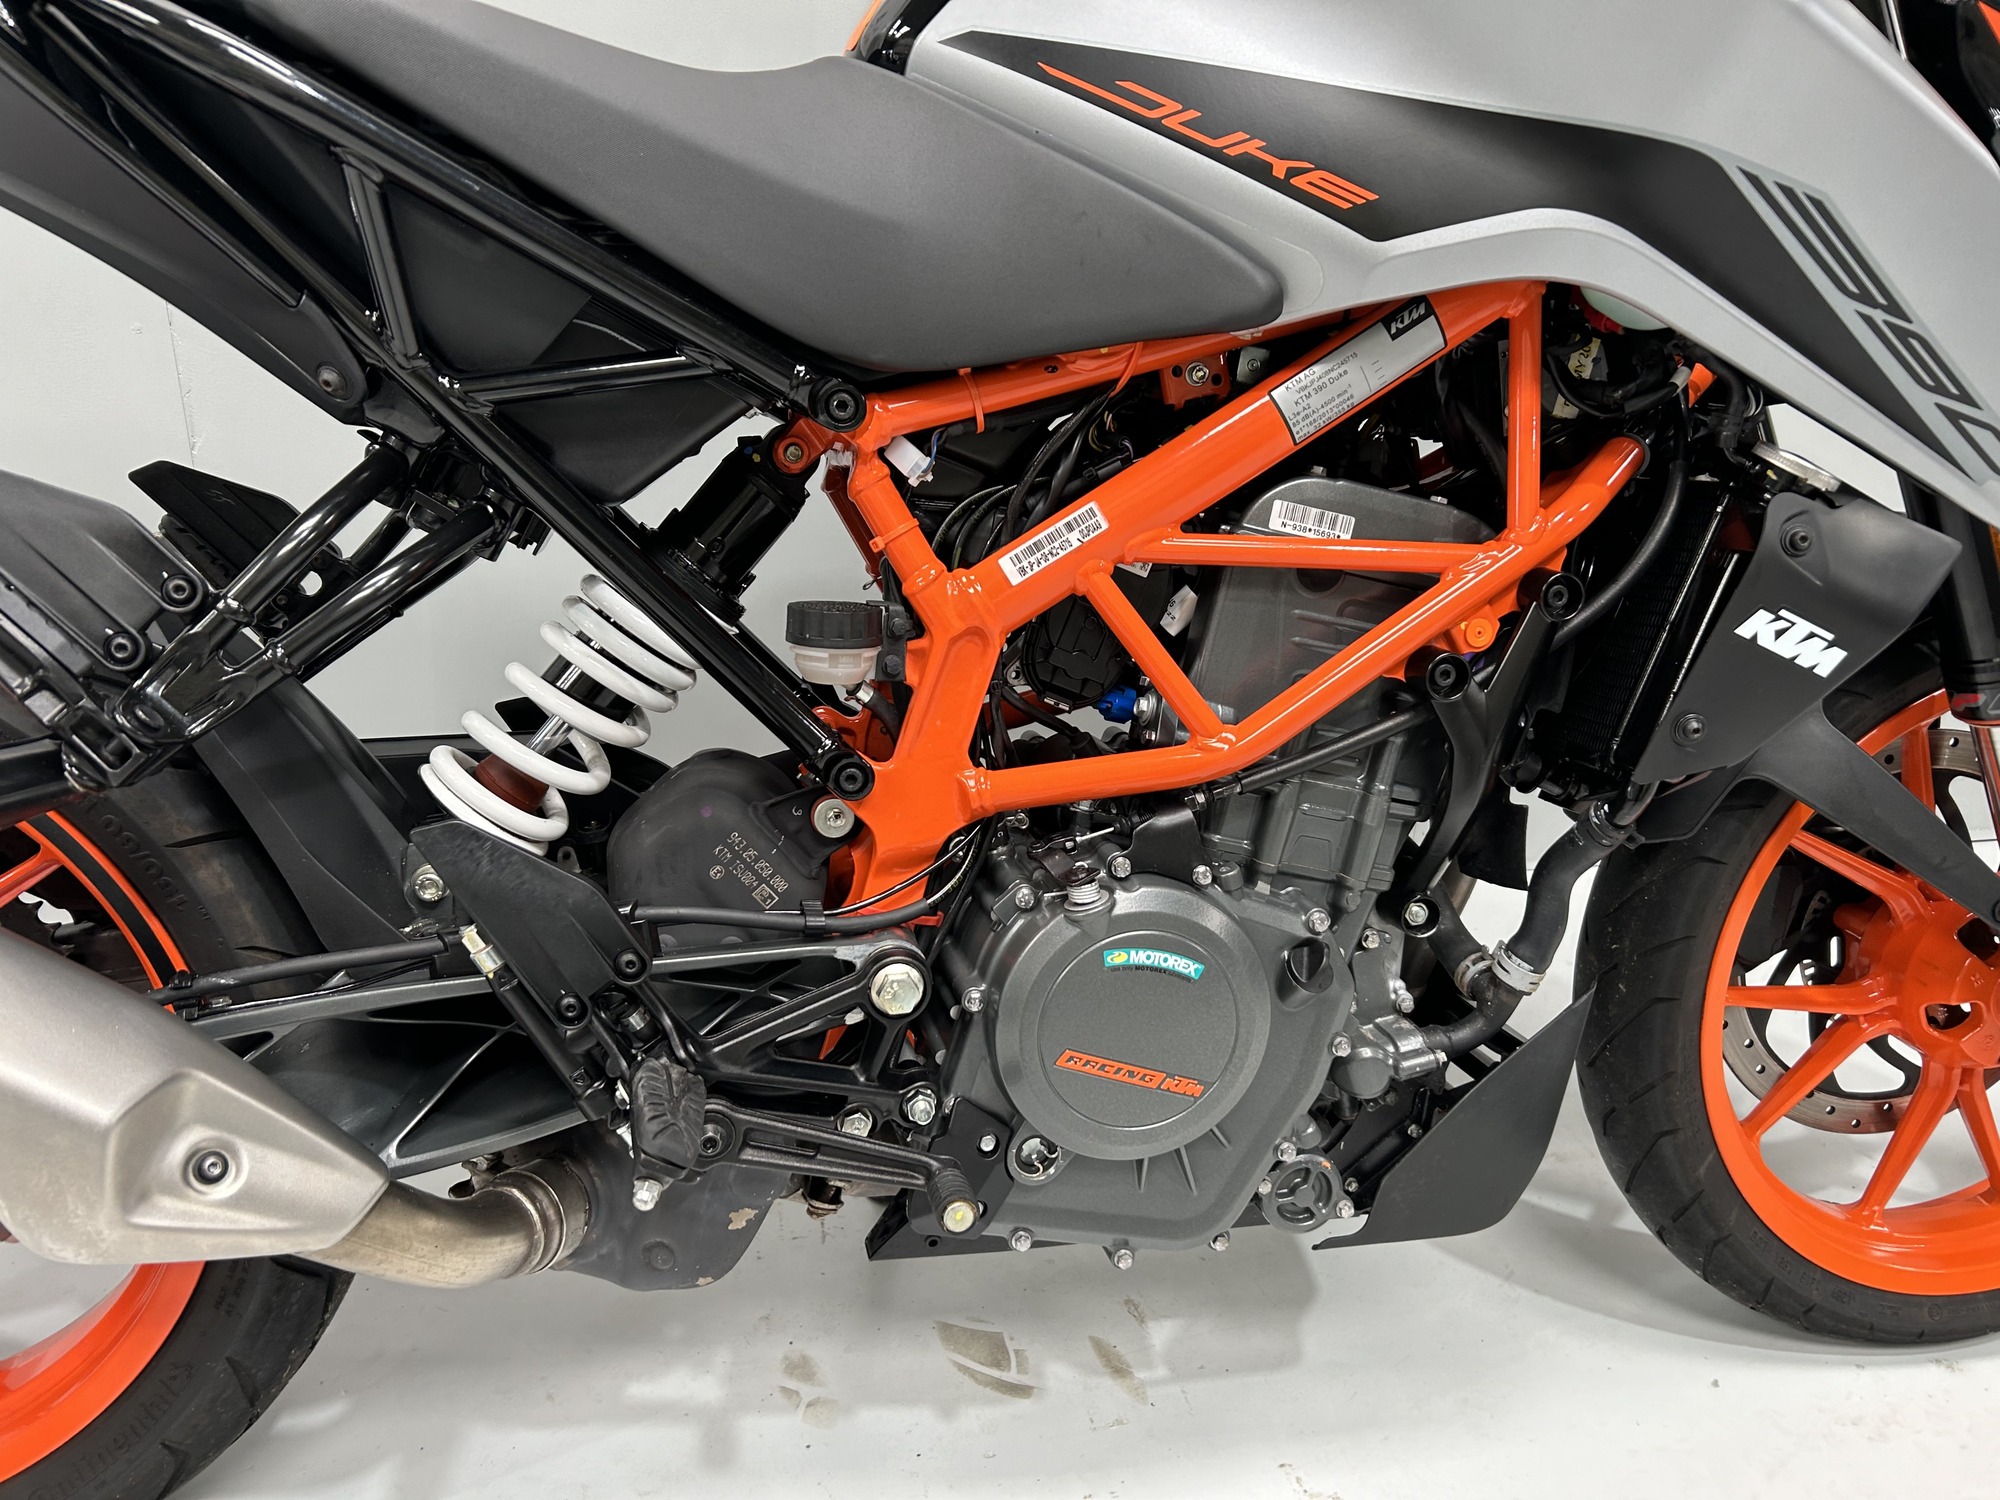 KTM 390 DUKE - NATIONWIDE DELIVERY AVAILABLE - Nationwide Motorbikes